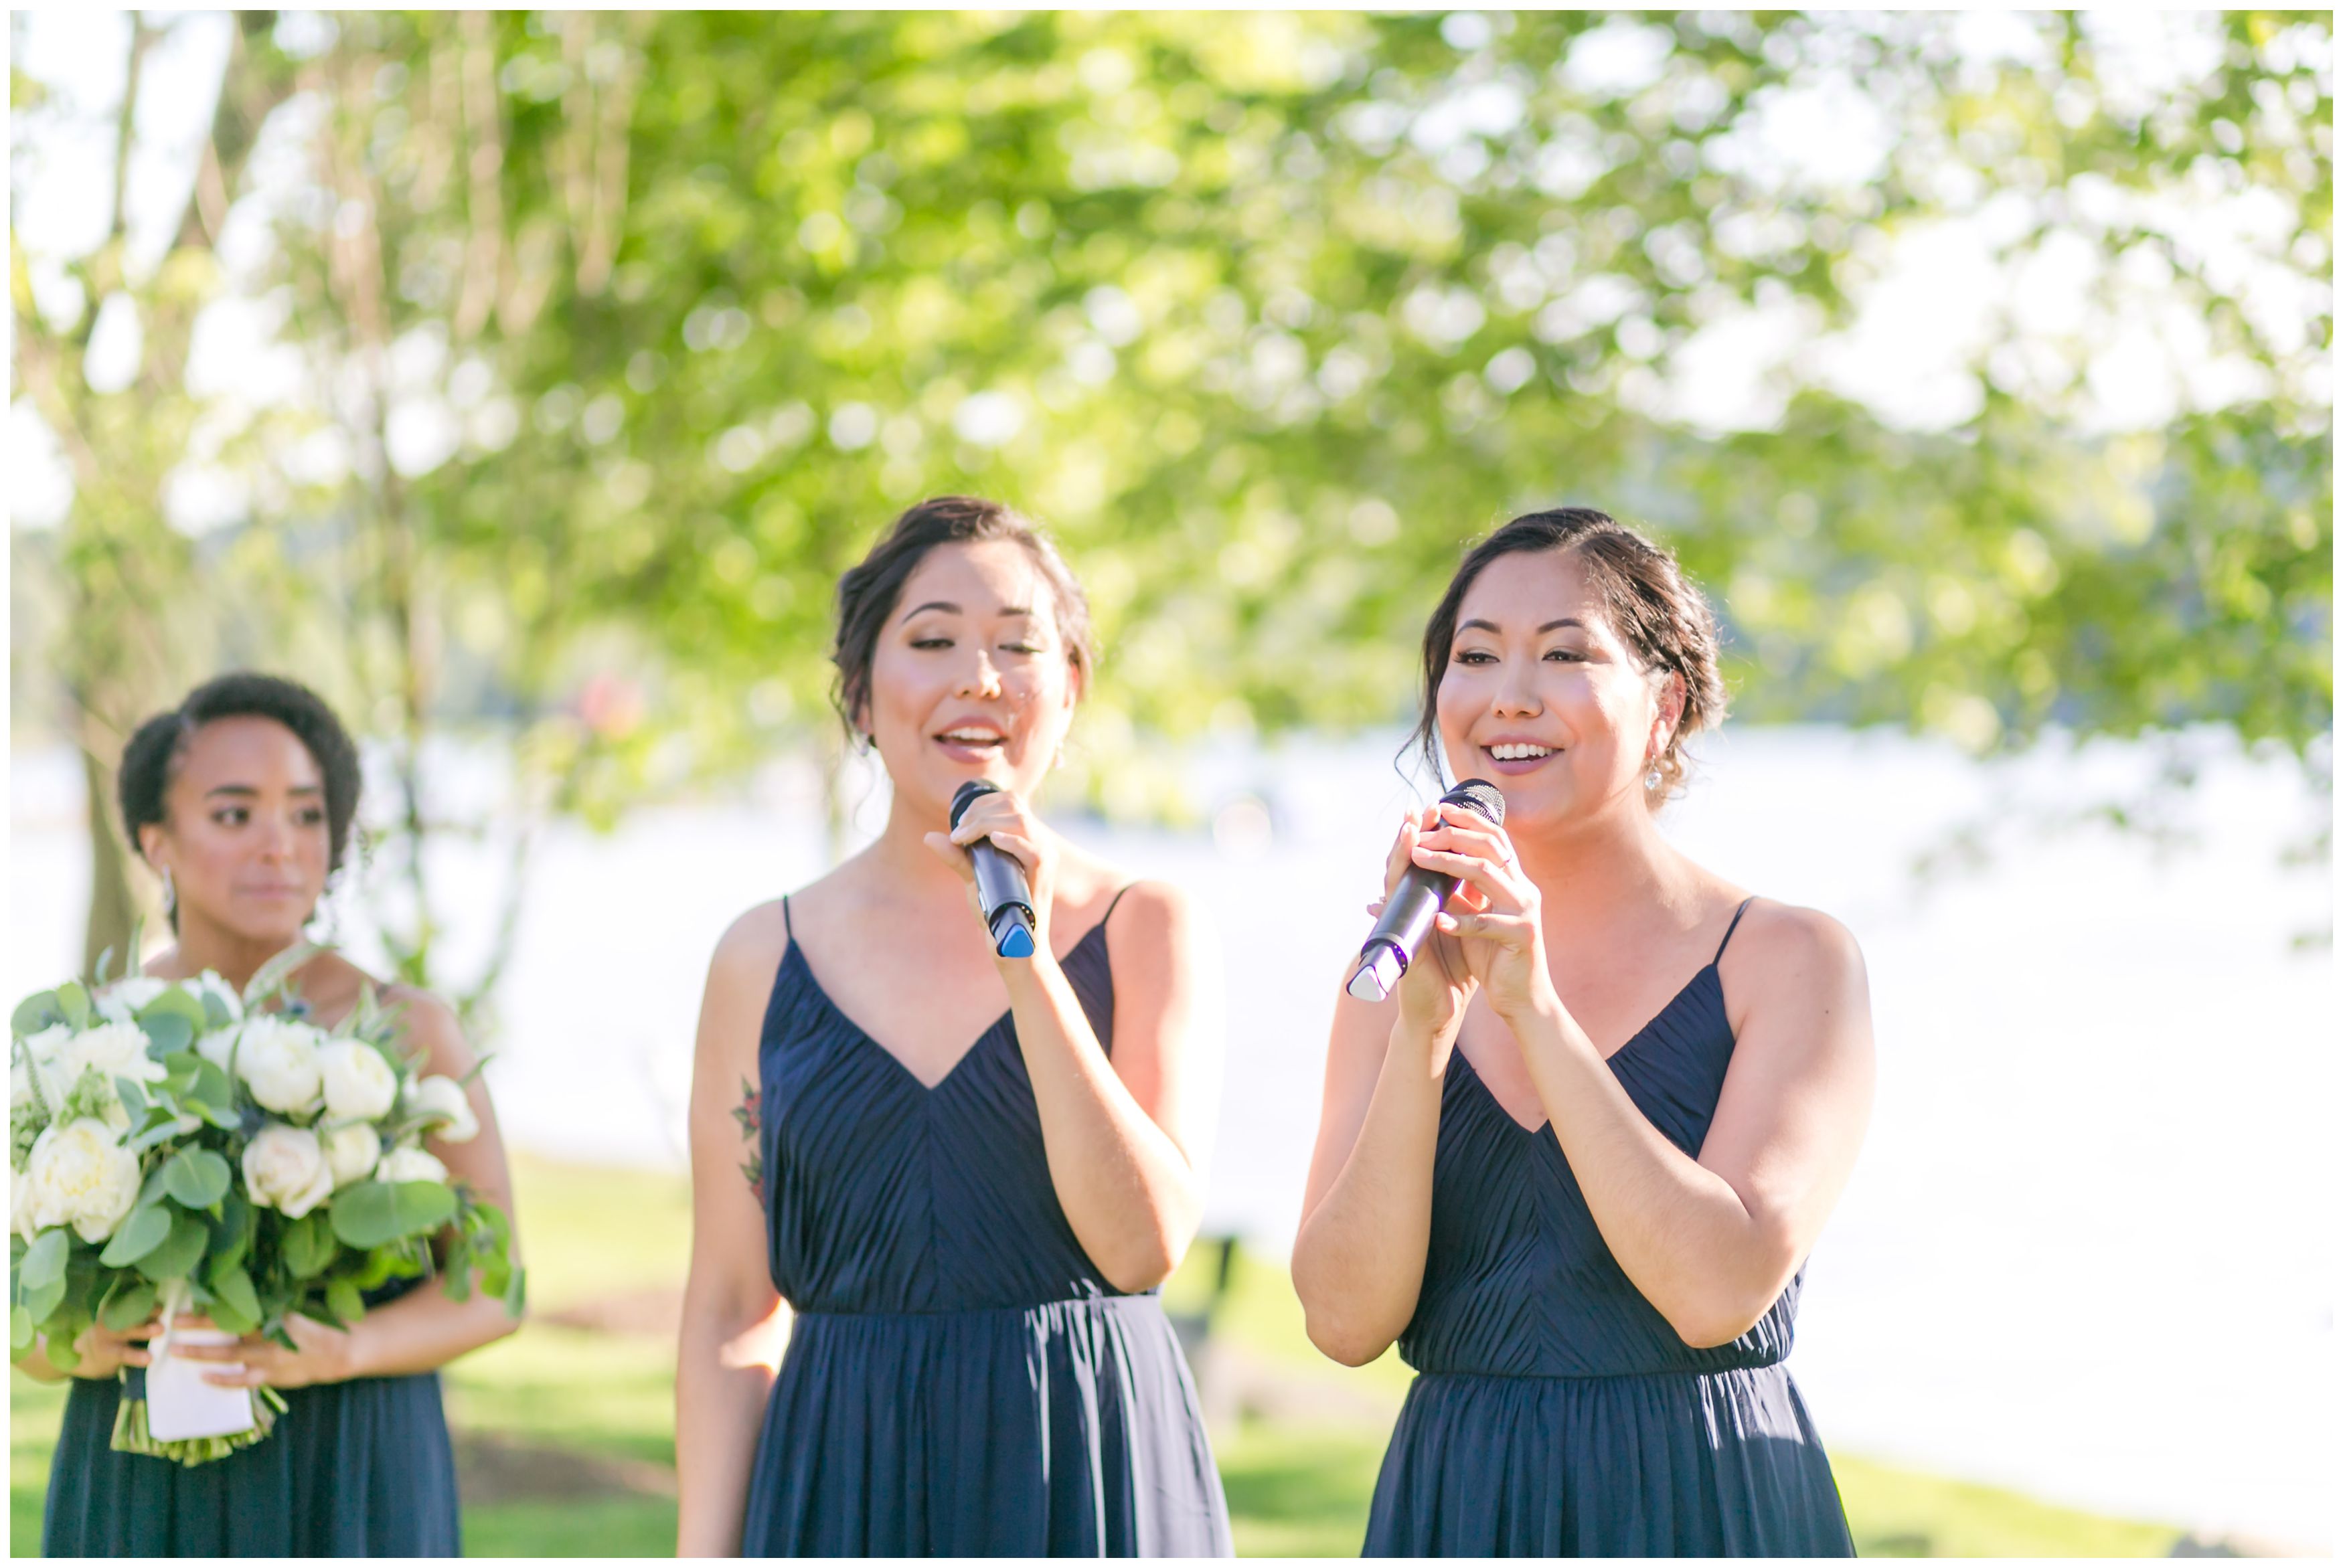 Twin sisters singing at outdoor lakeside ceremony